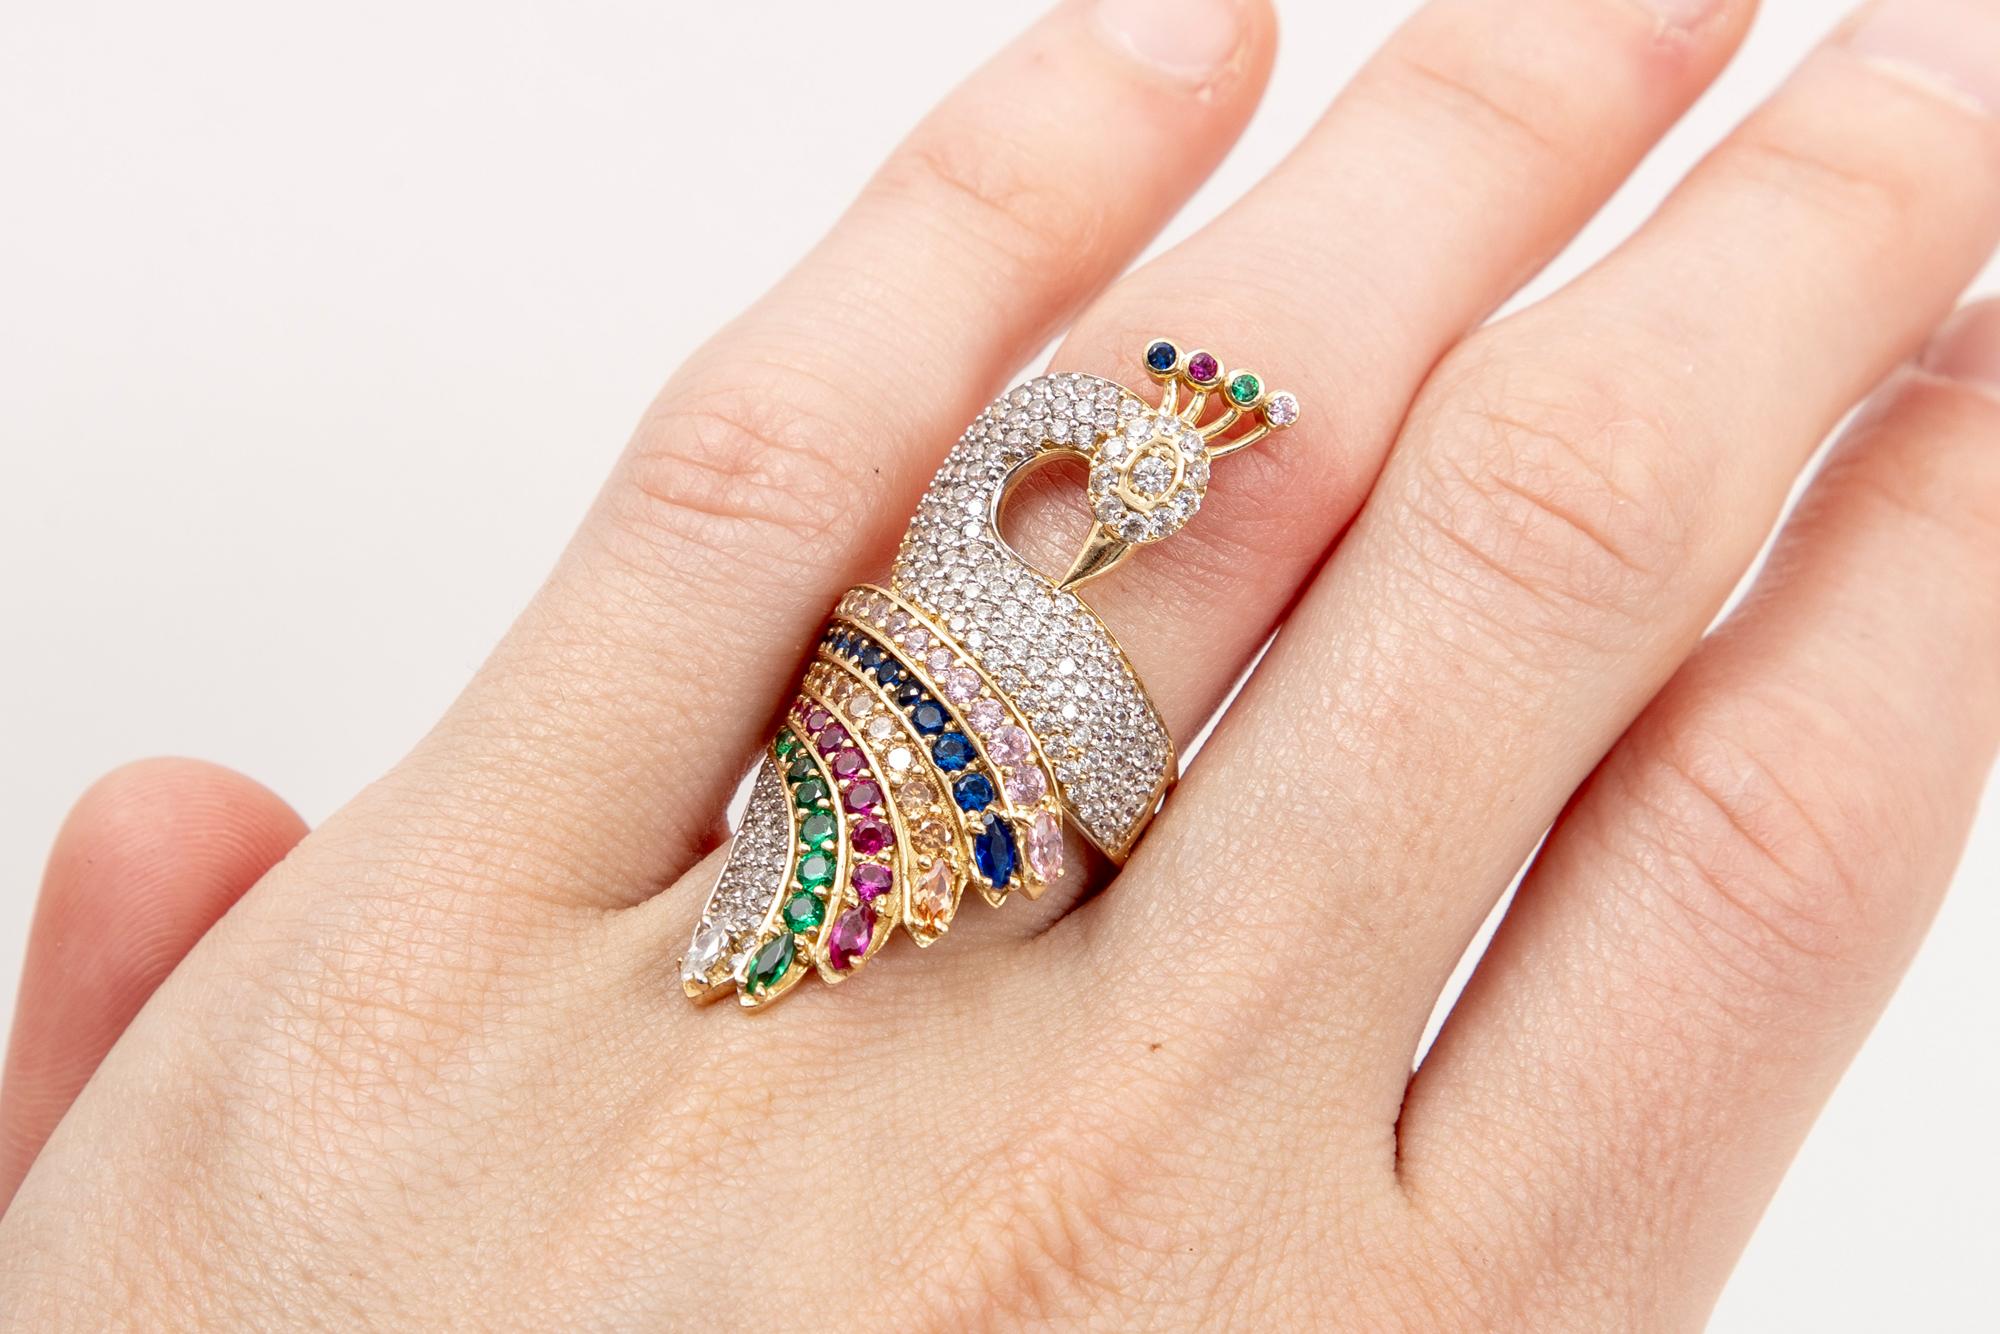 Peacock Rings For Women Yellow Gold Plated Long Finger Ring Adjustable  Anillo Bague Femme Wedding Jewelry Accessories Party Gift - AliExpress